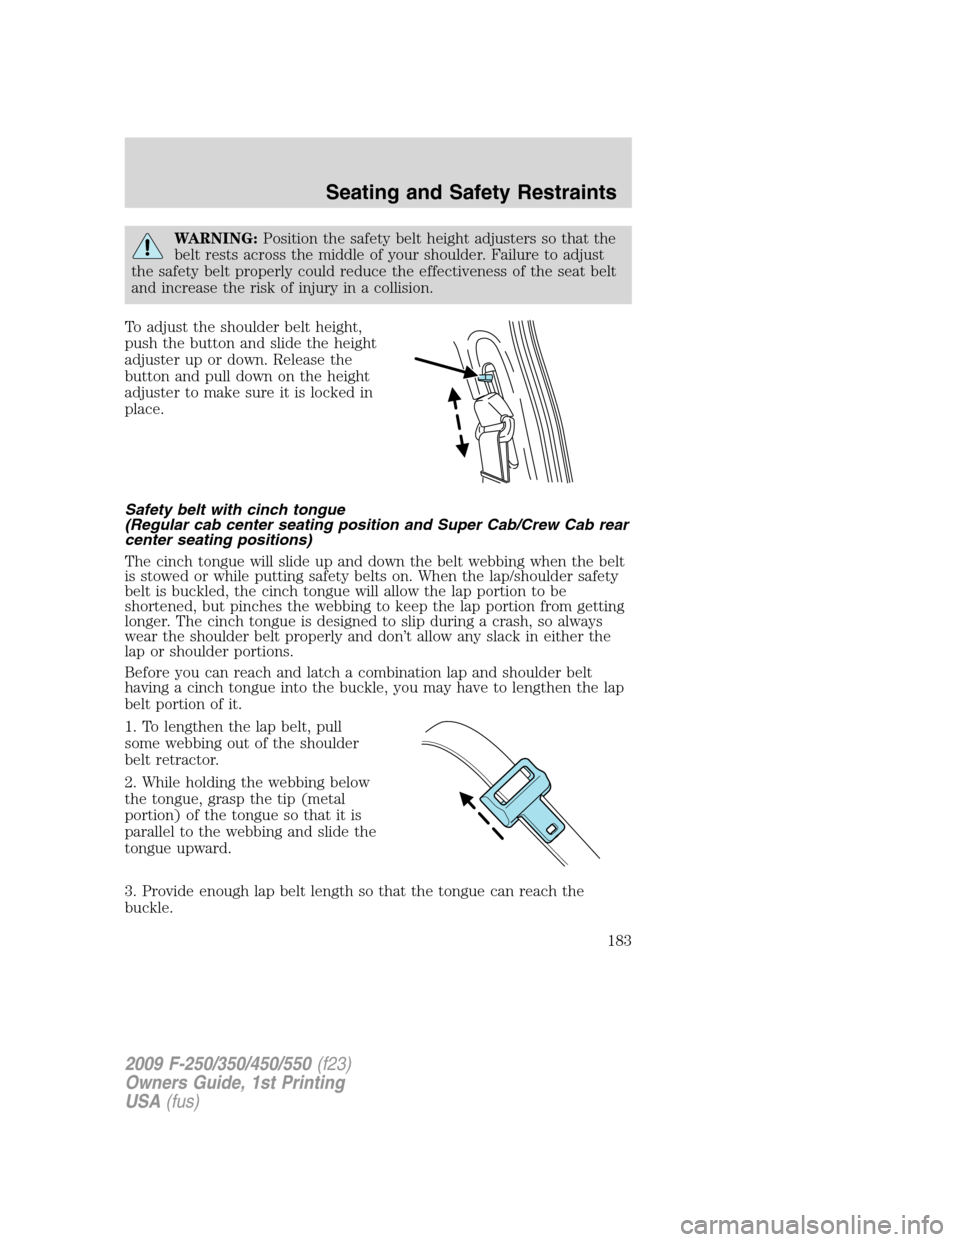 FORD SUPER DUTY 2009 2.G Owners Manual WARNING:Position the safety belt height adjusters so that the
belt rests across the middle of your shoulder. Failure to adjust
the safety belt properly could reduce the effectiveness of the seat belt
